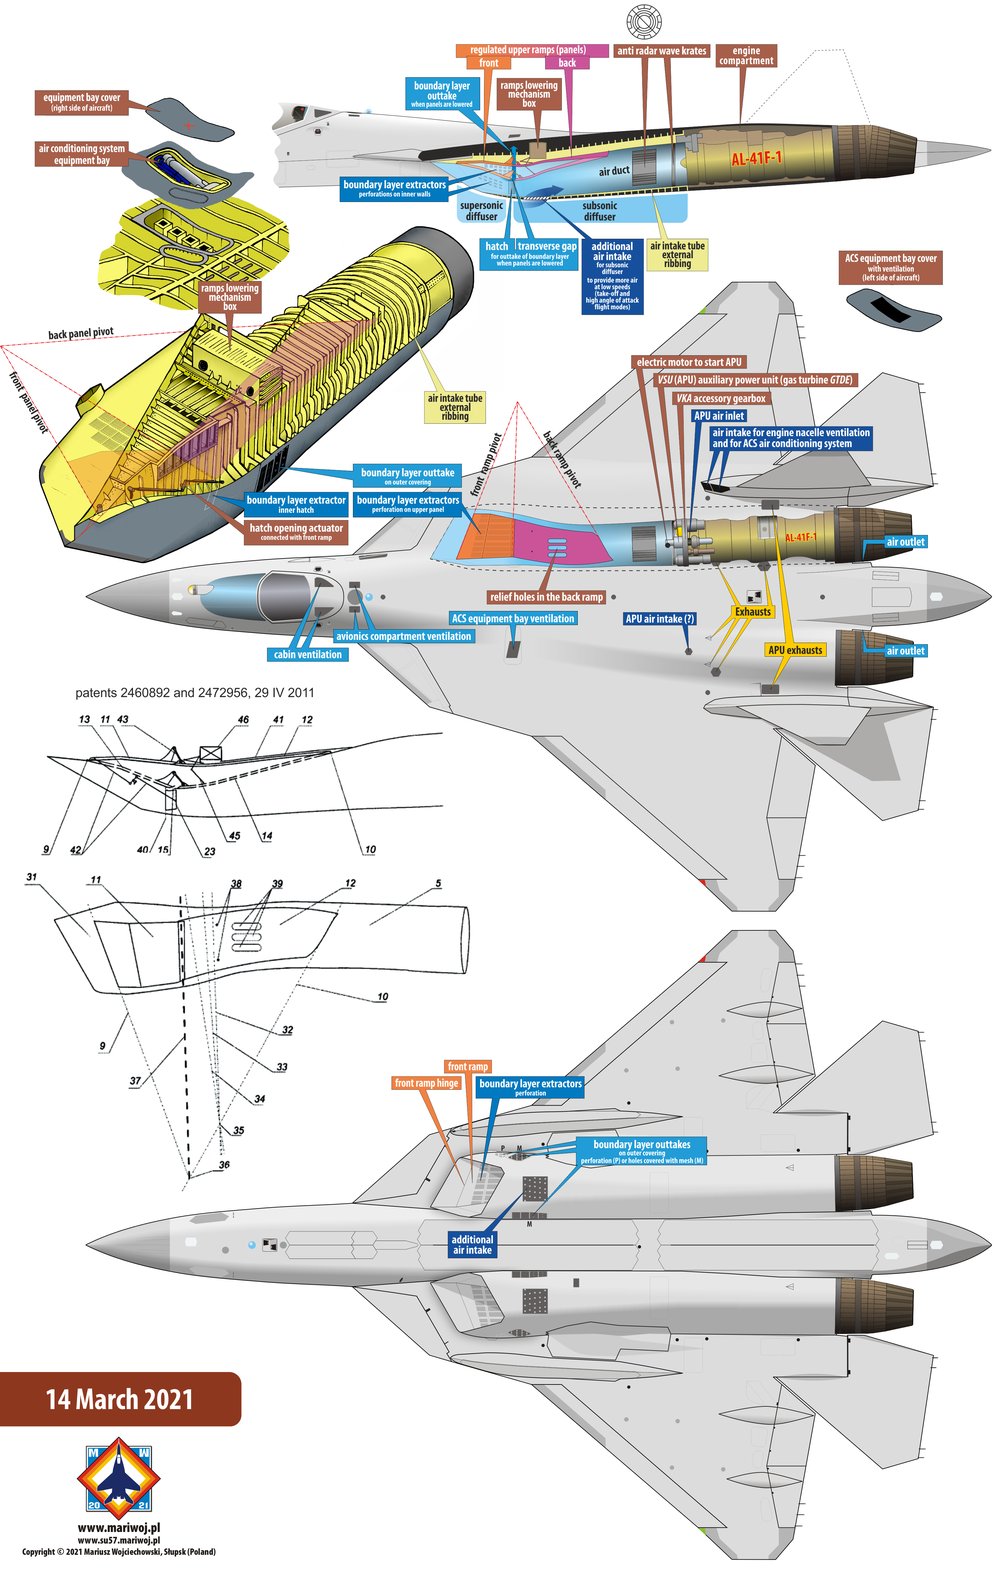 Sukhoi Su-57 technical details - air intake and engine AL-41F-1